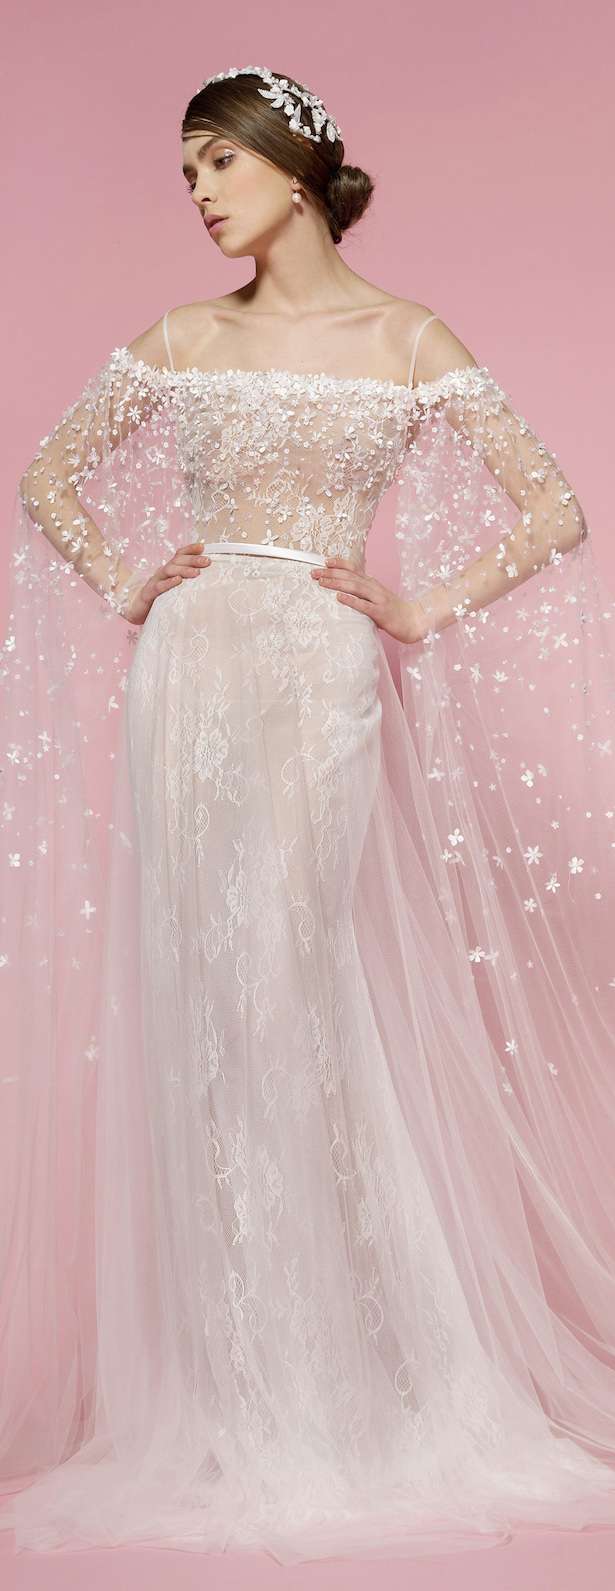 The 2018 Wedding Dress Collection by Georges Hobeika